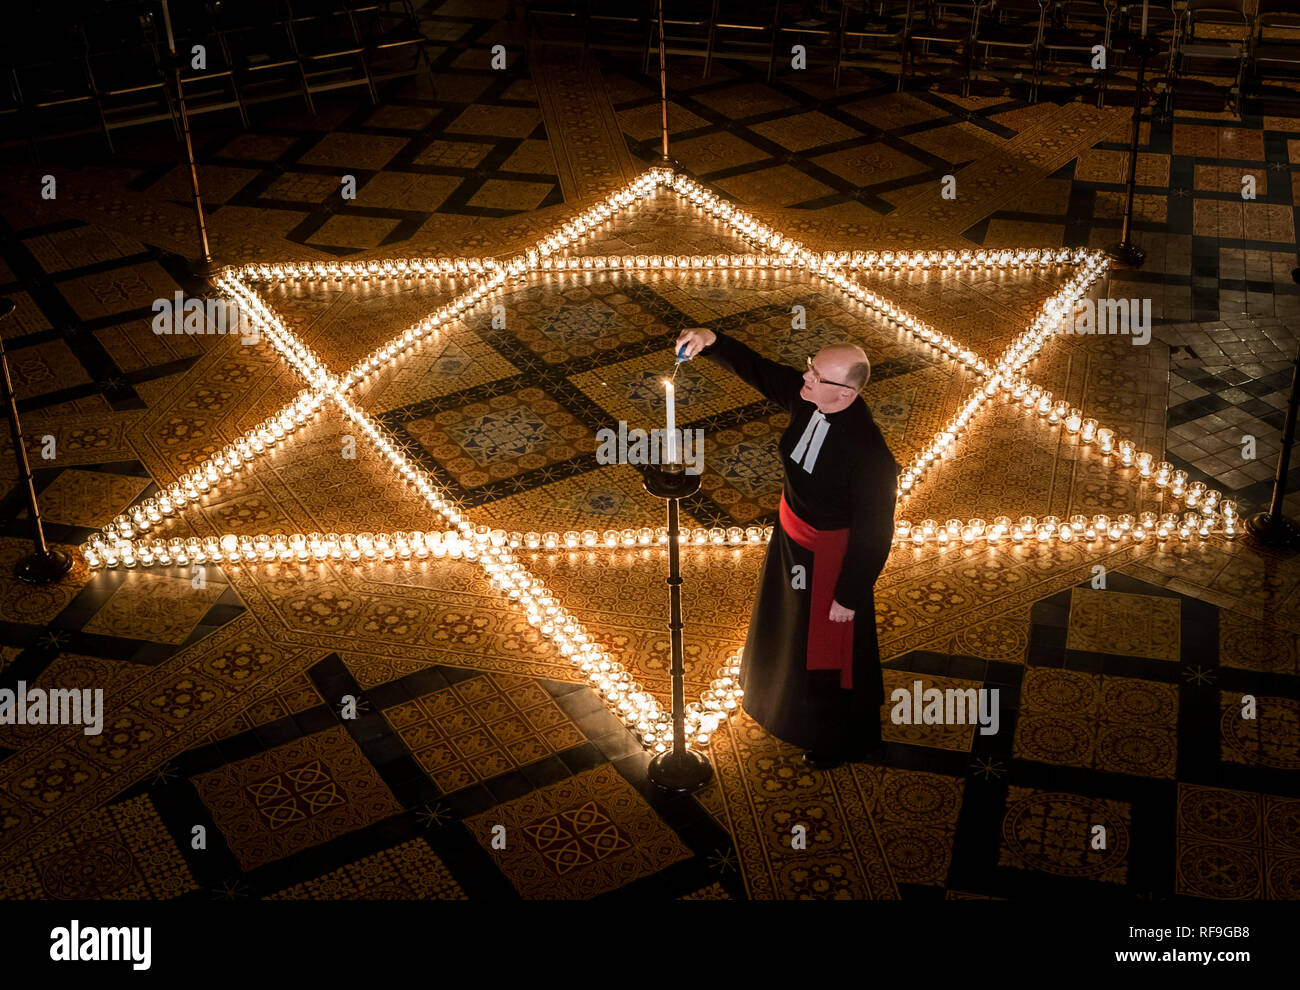 Canon Chancellor Christopher Collingwood helps light six hundred candles in the shape of the Star of David, in memory of more than 6 million Jewish people murdered by the Nazis in the Second World War, at York Minster in York. Stock Photo